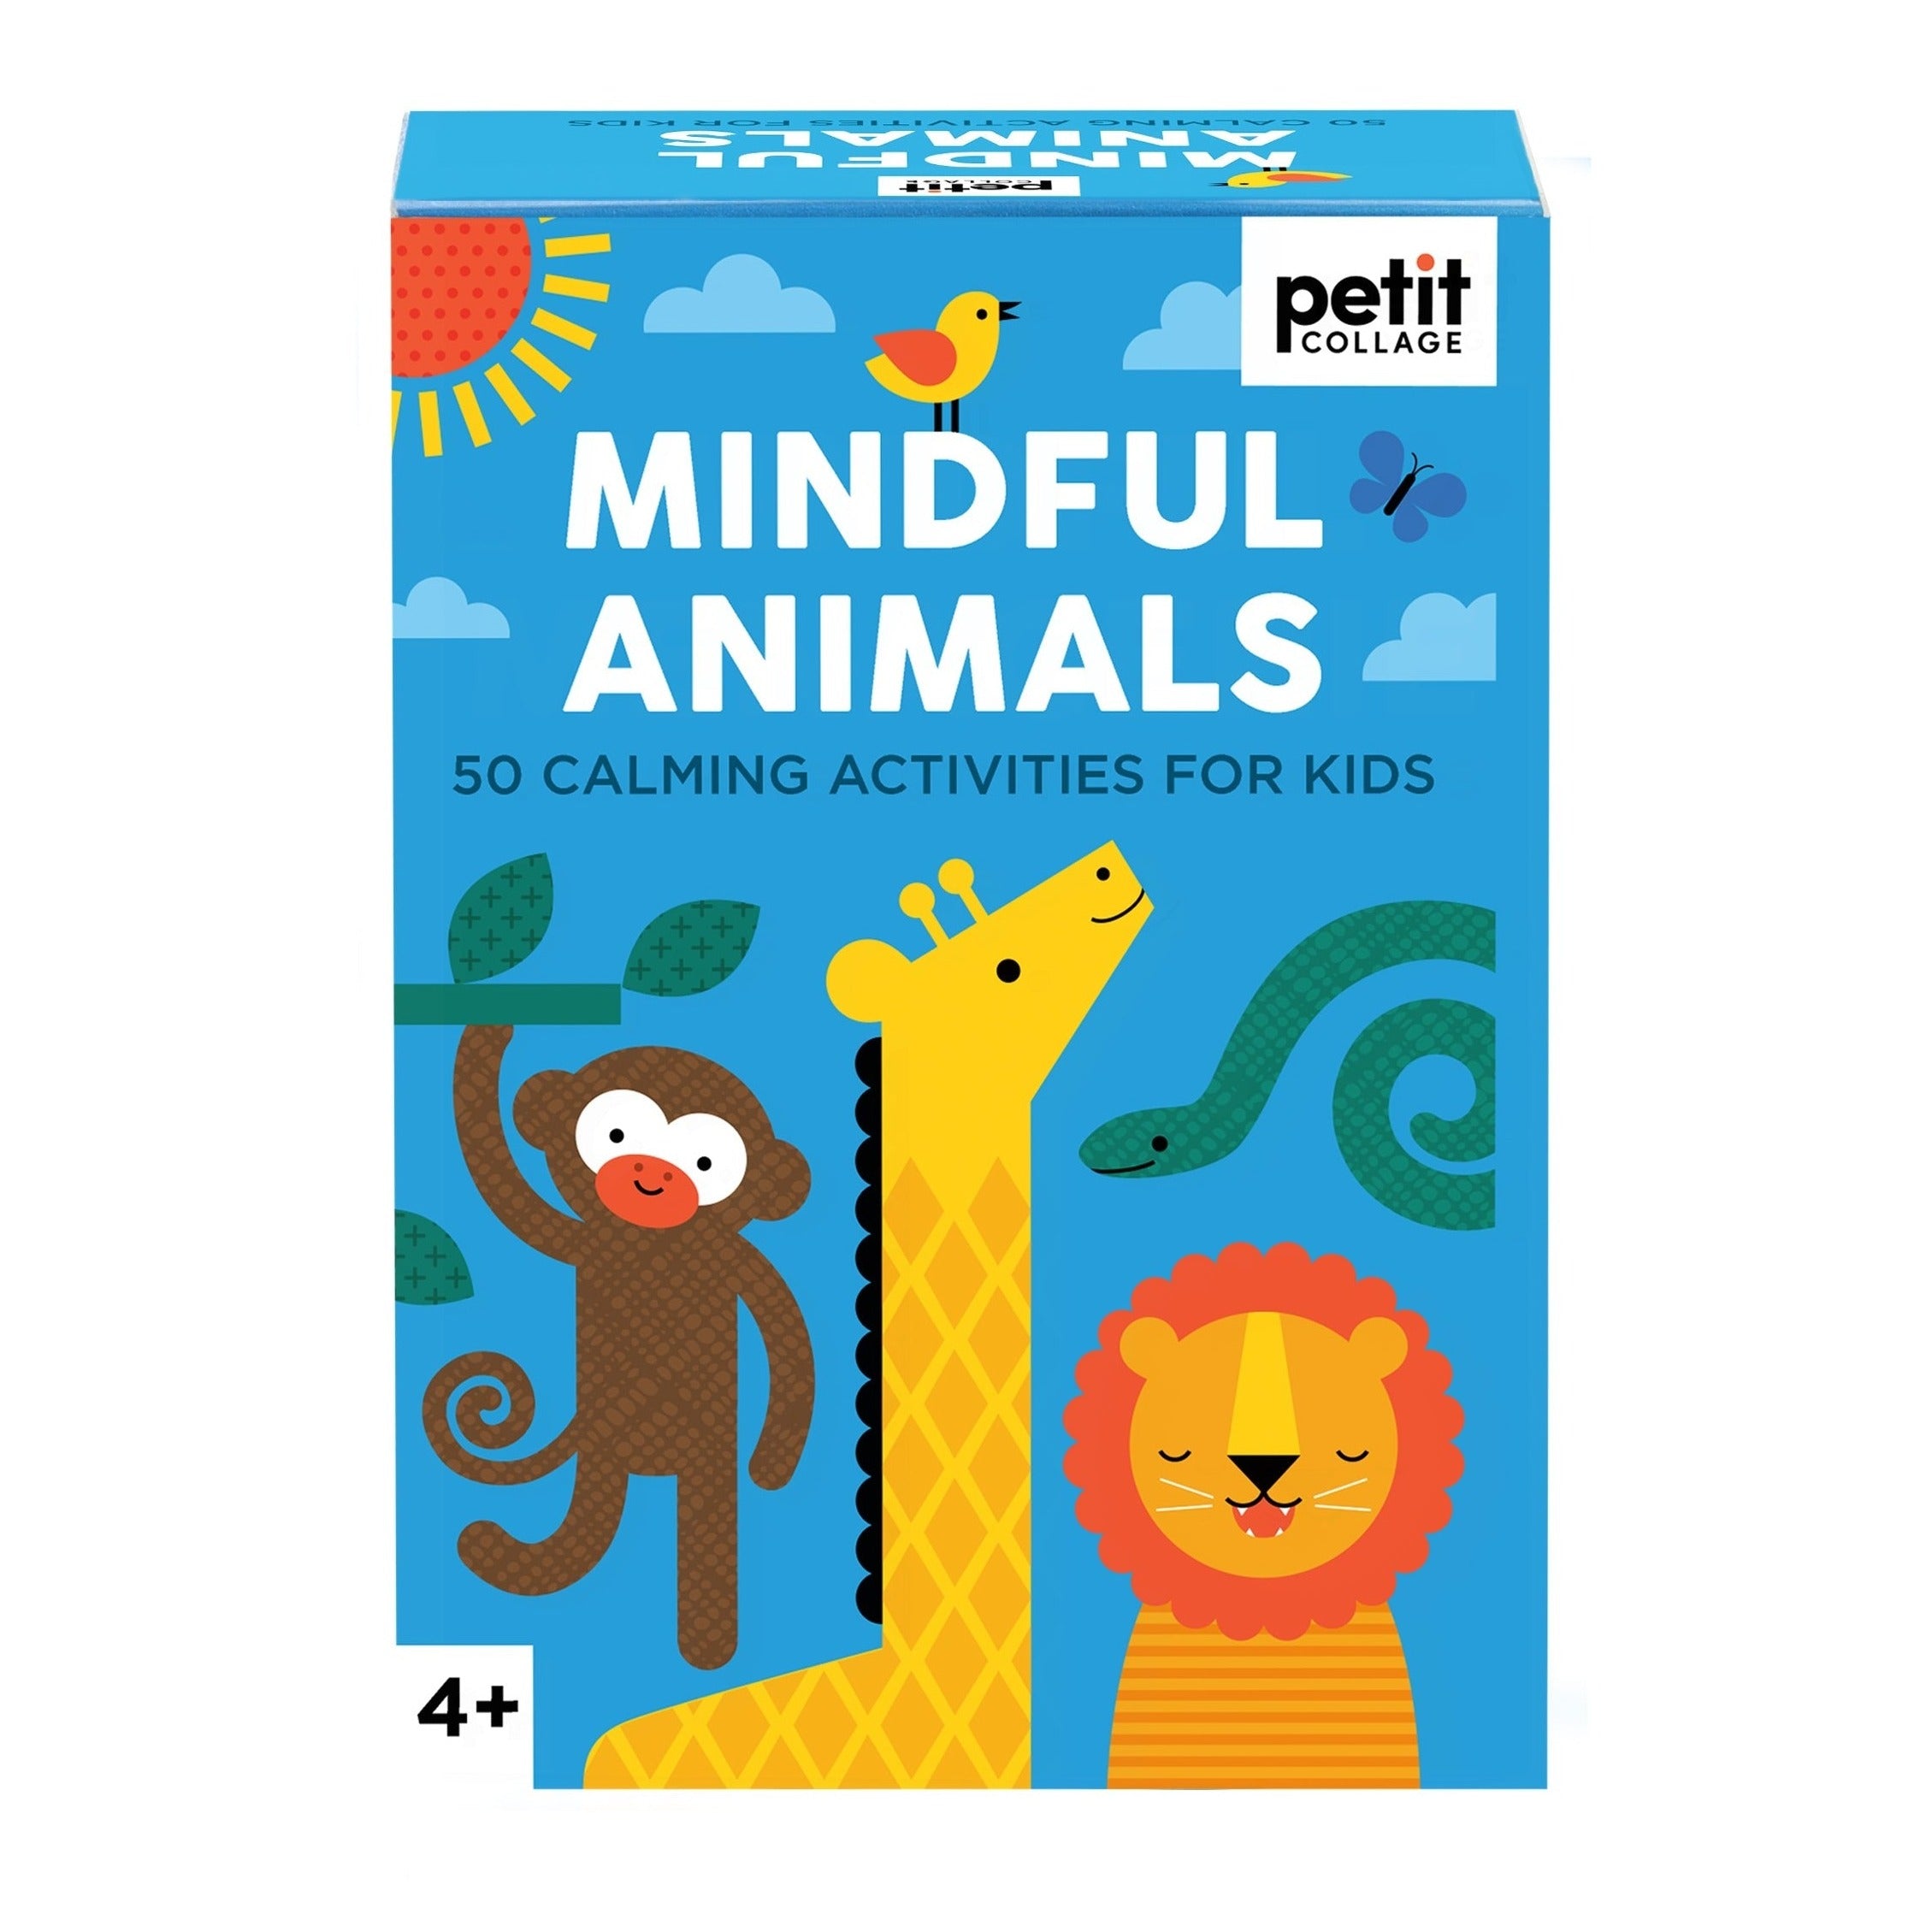 Mindful Animals: 50 Calming Activities For Kids, boxed, white background 